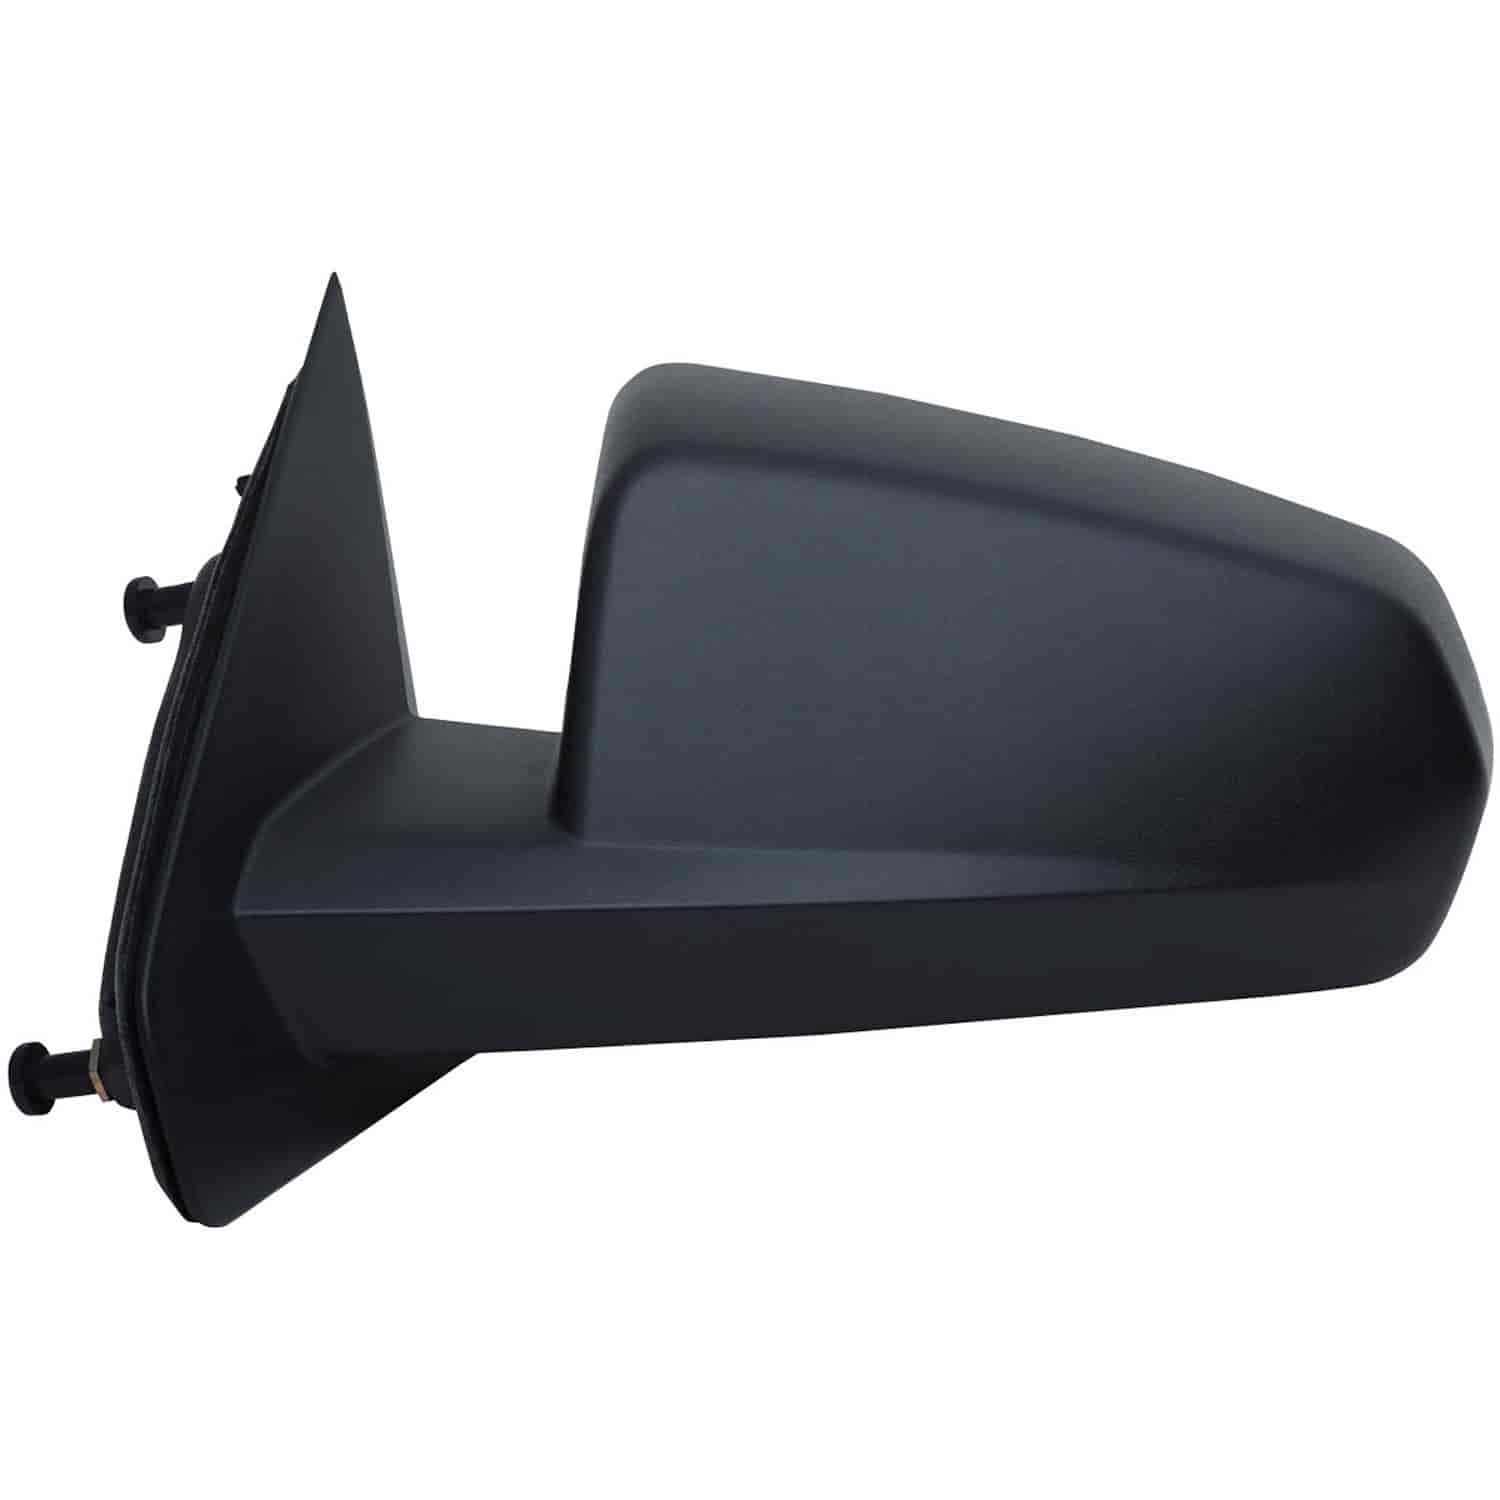 OEM Style Replacement mirror for 08-14 Dodge Avenger driver side mirror tested to fit and function l